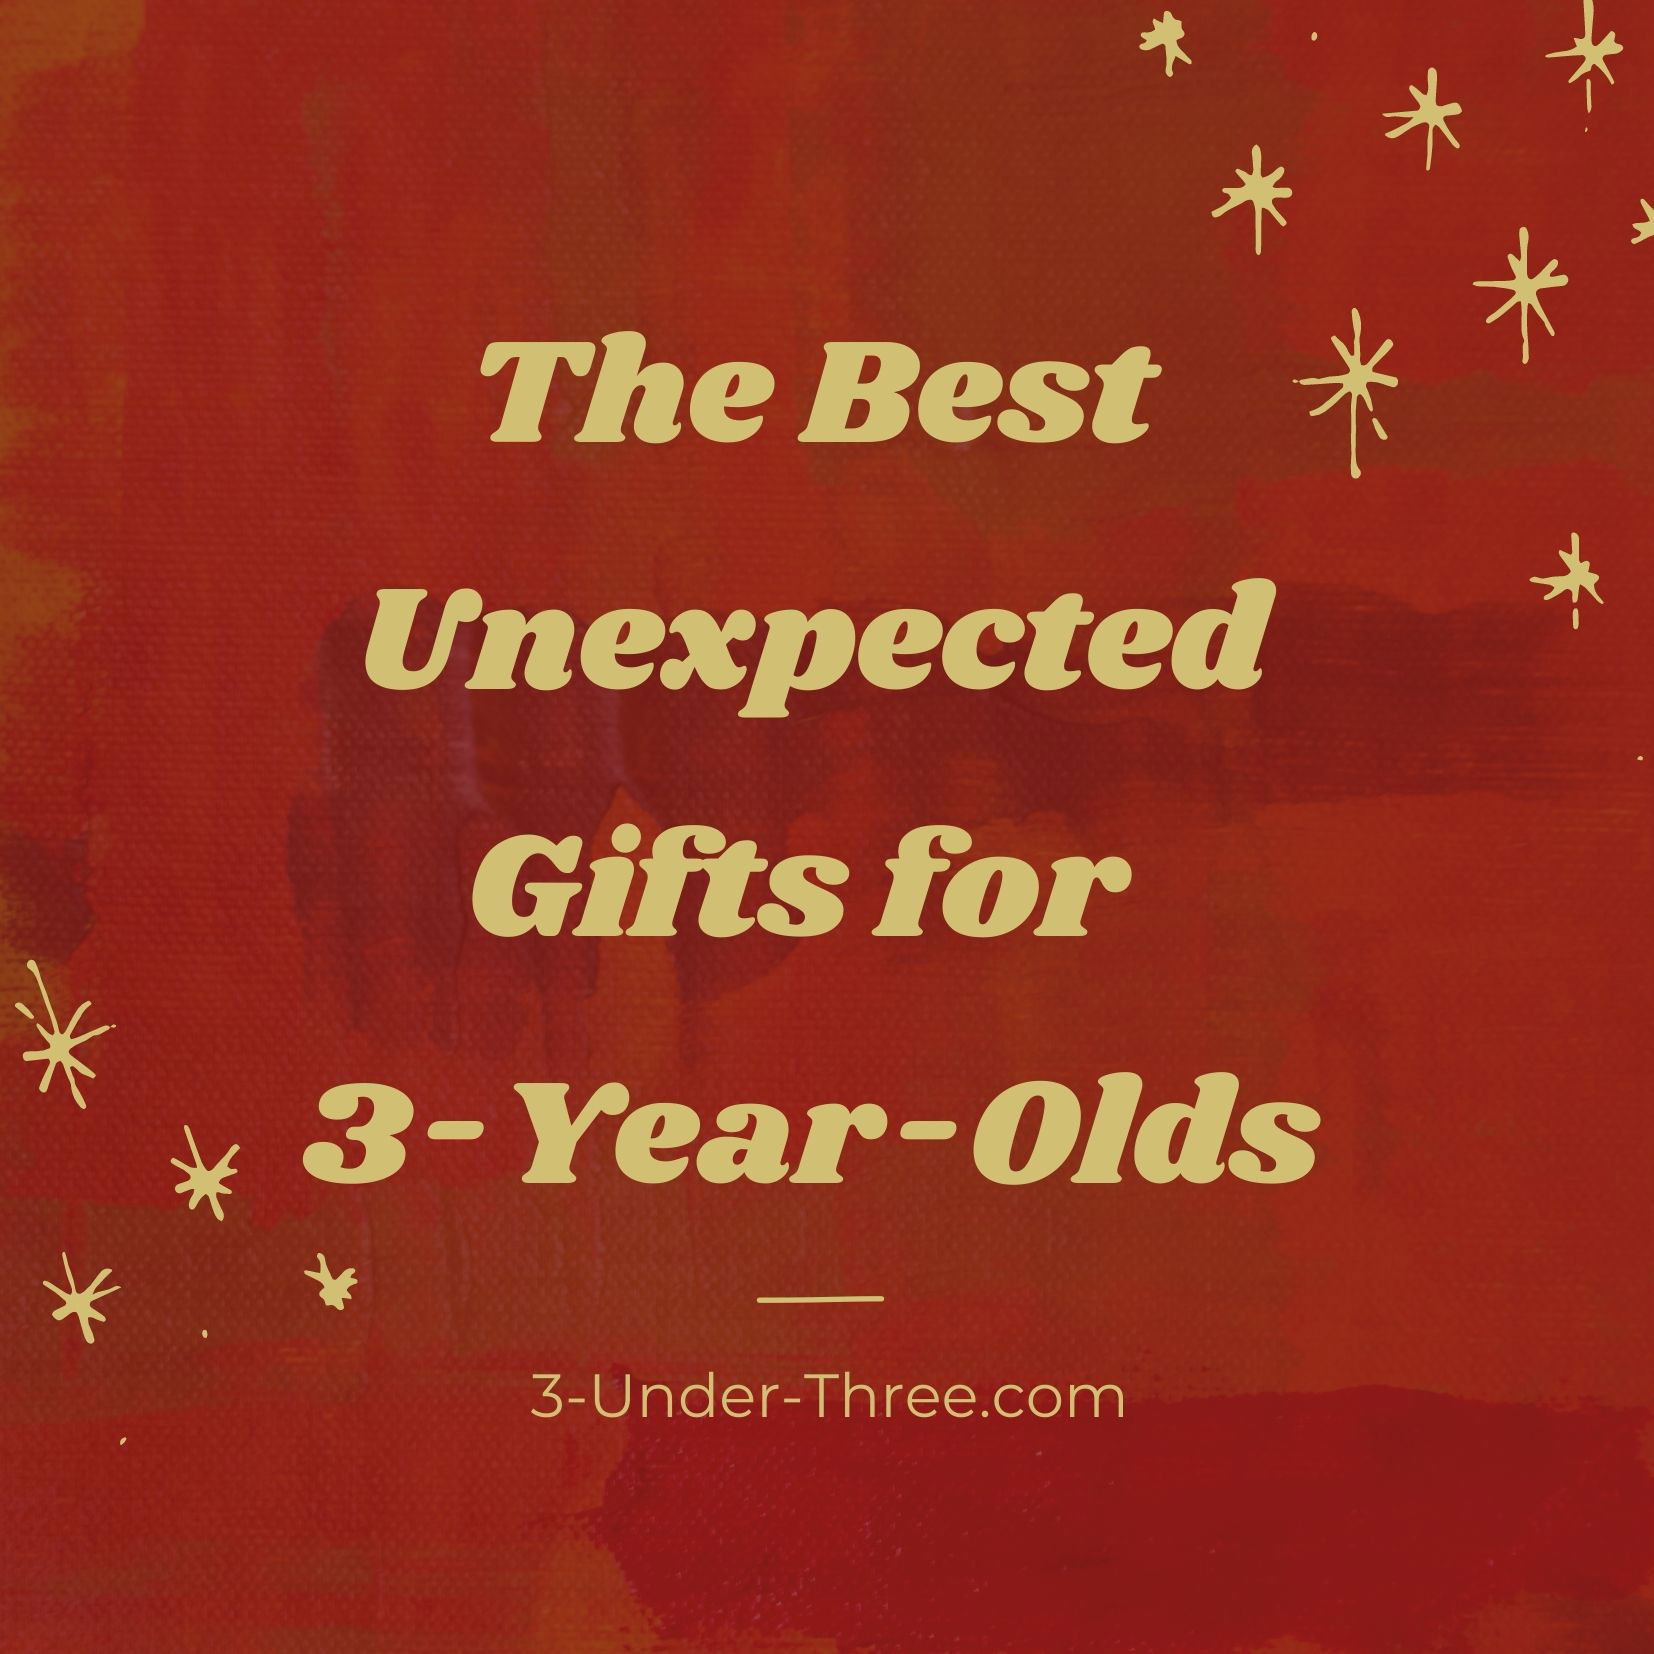 The Best Unexpected Gifts for Three-Year-Olds